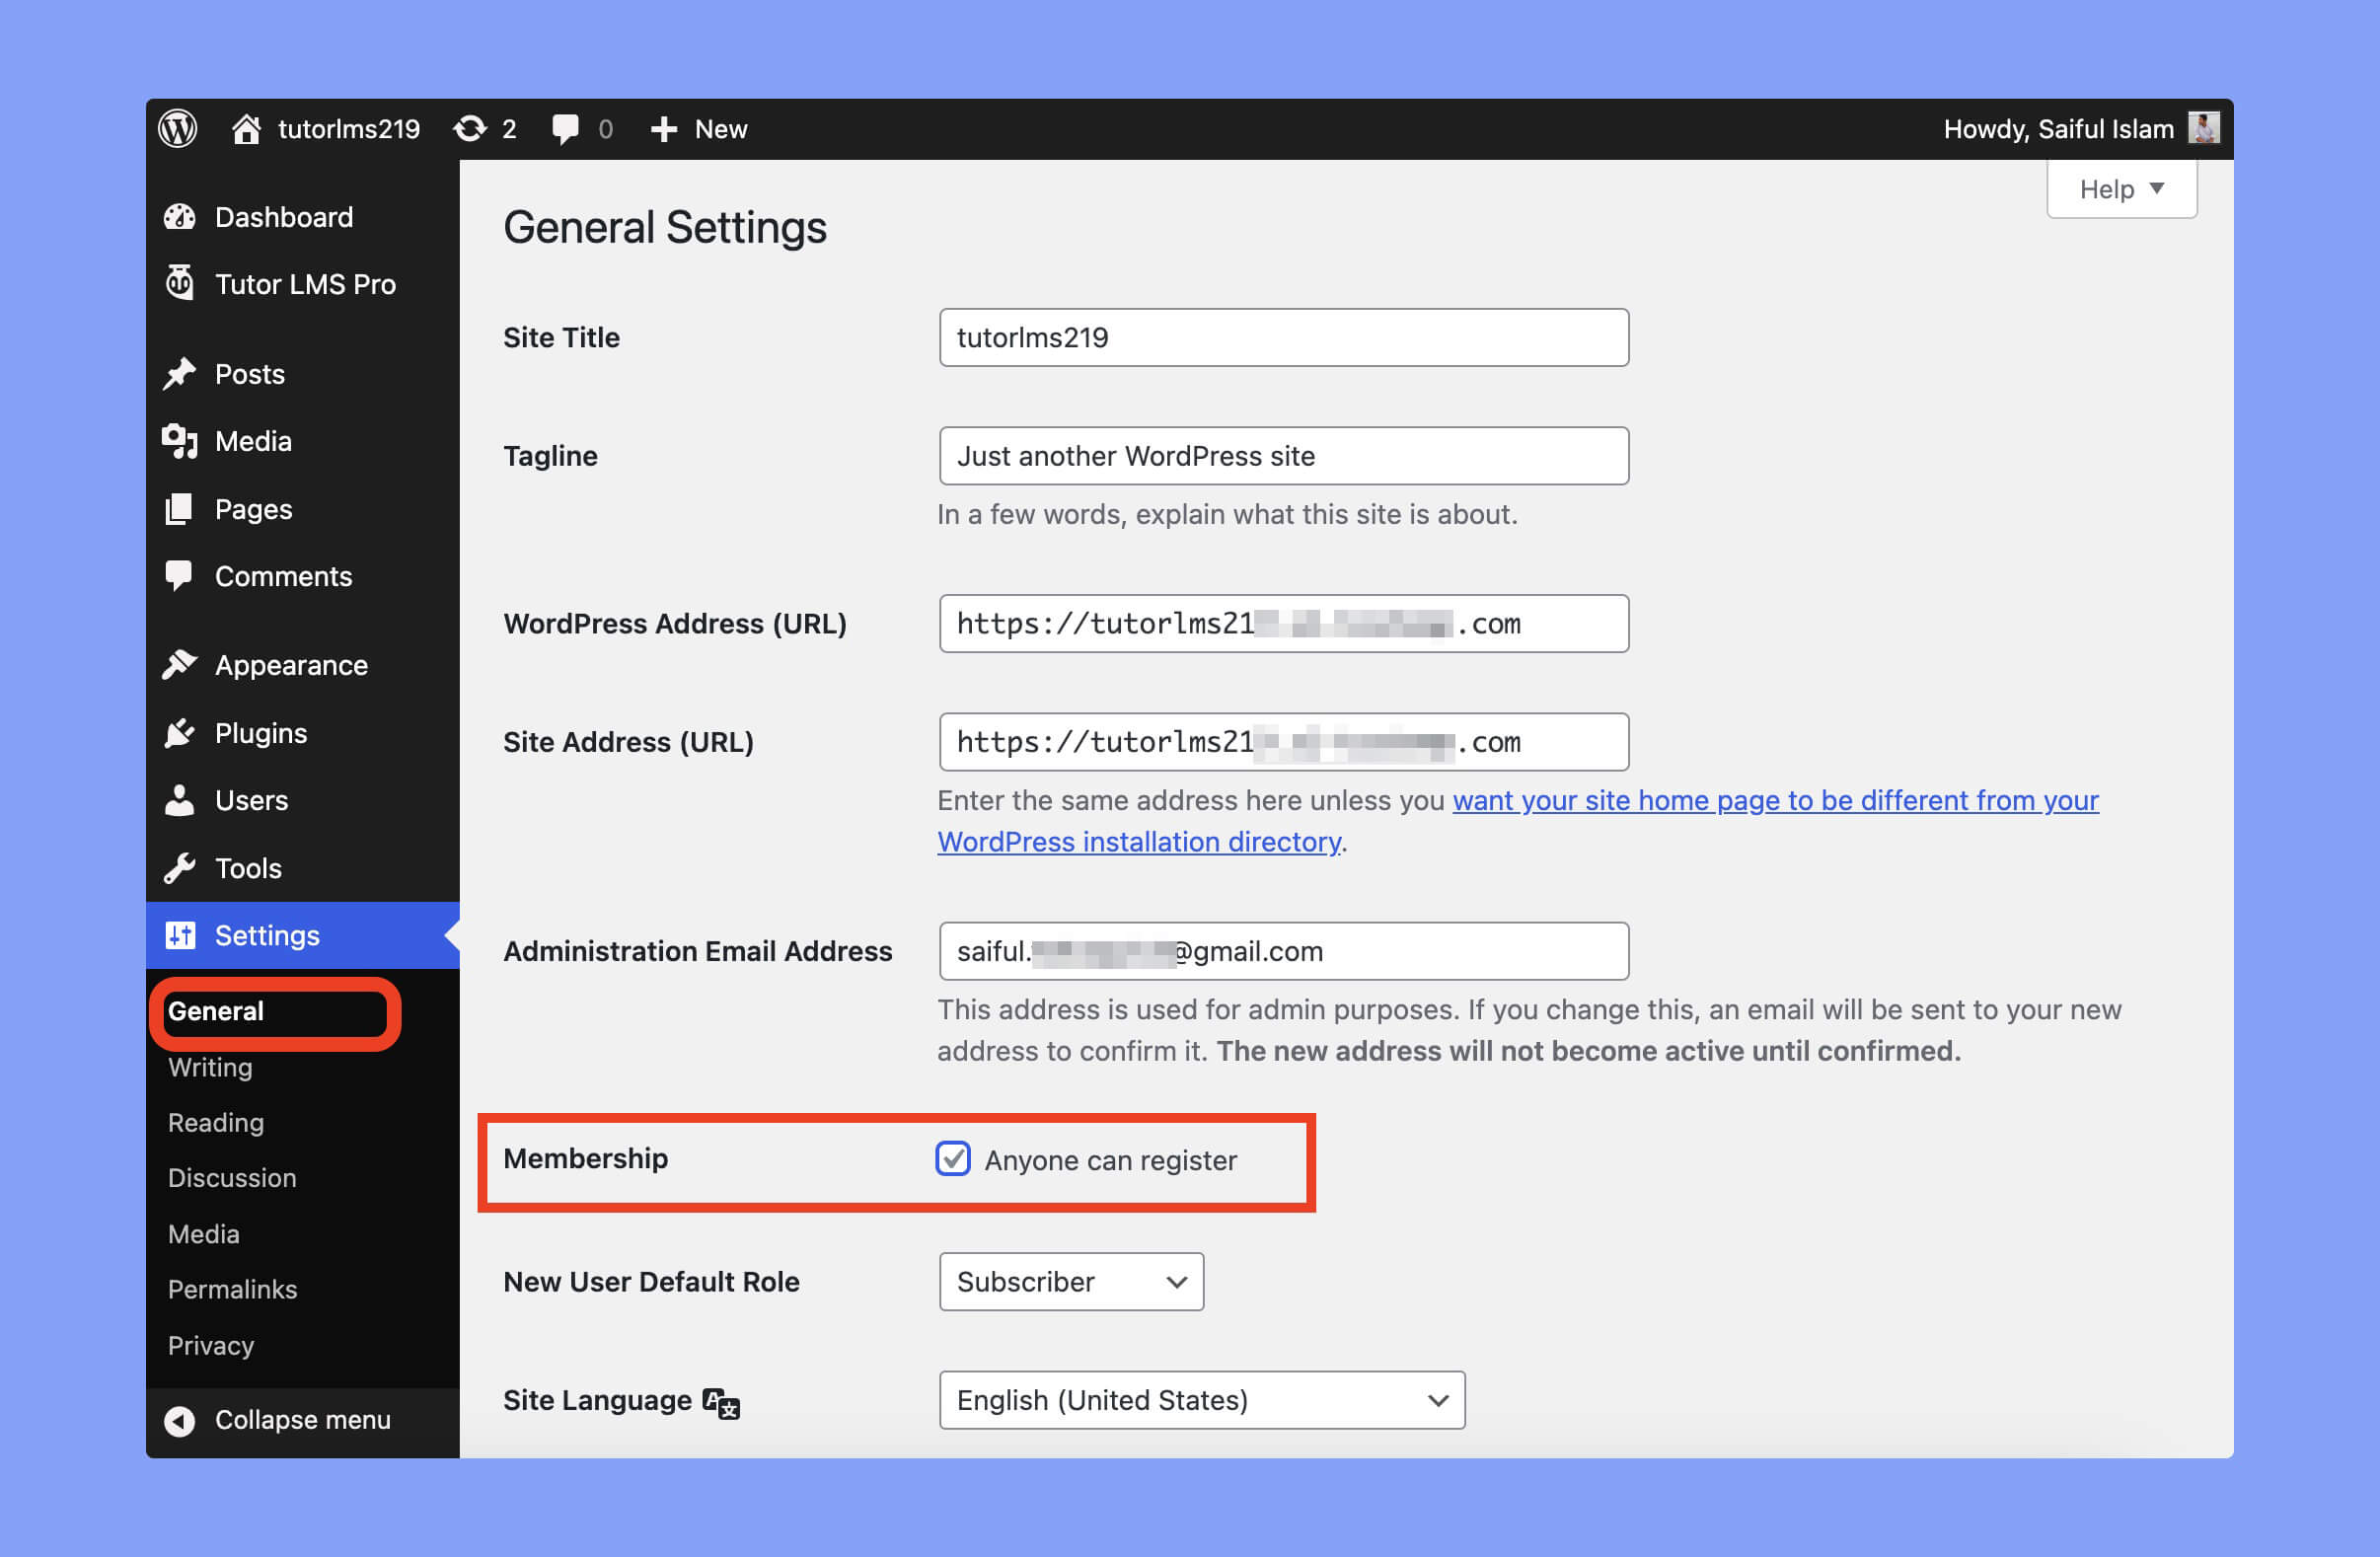 Enable the anyone can register option from the WP dashboard general settings